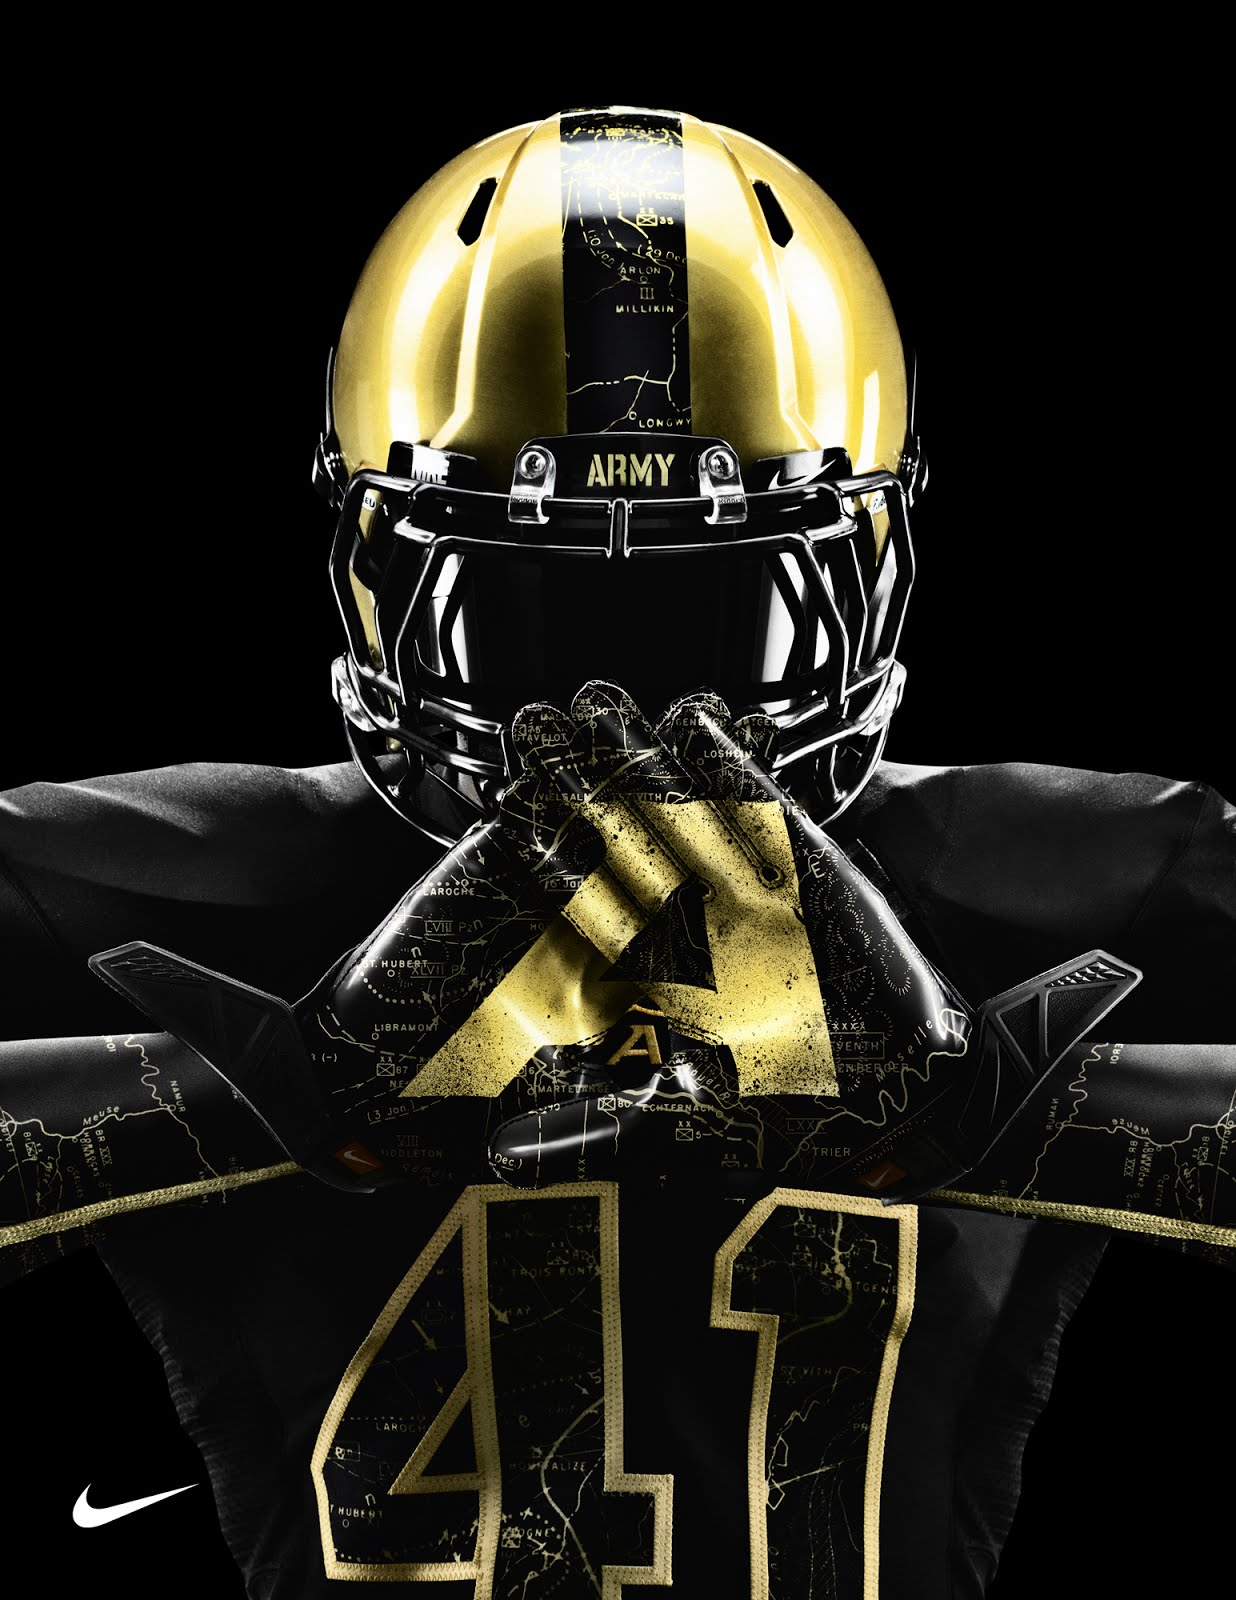 Super Punch Awesome new Army and Navy football uniforms by Nike